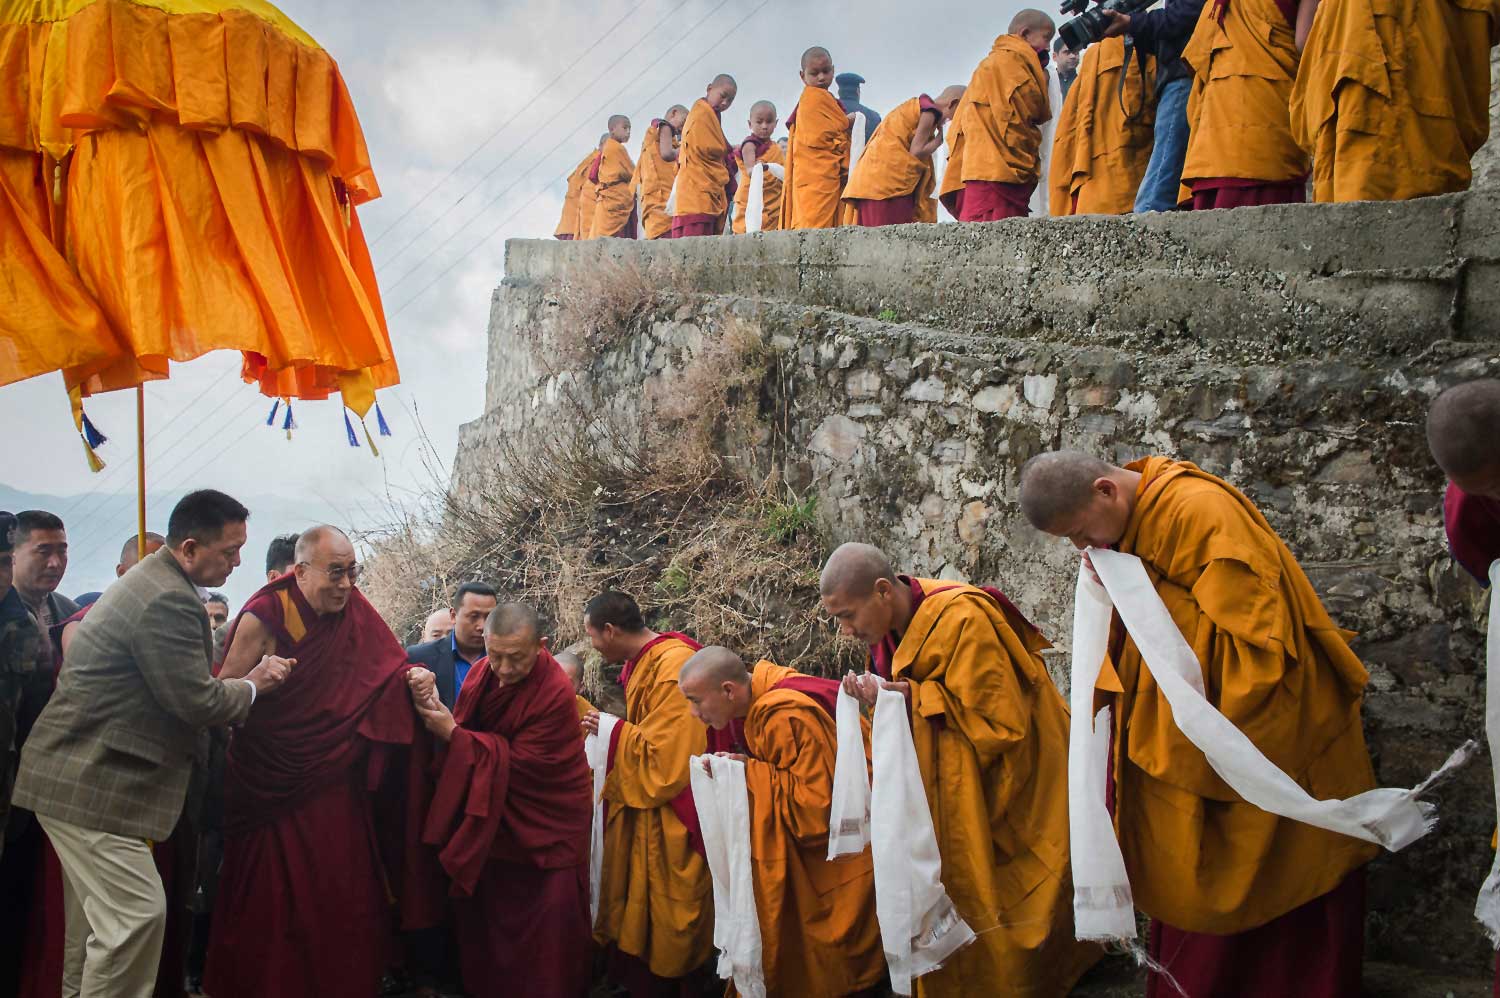 Tibetan Buddhist monks holding ceremonial scarfs stand in a line to welcome their spiritual leader the Dalai Lama, as he arrives at the Jhonang Takten Phuntsok Choeling monastery in Shimla, India, March 2014.